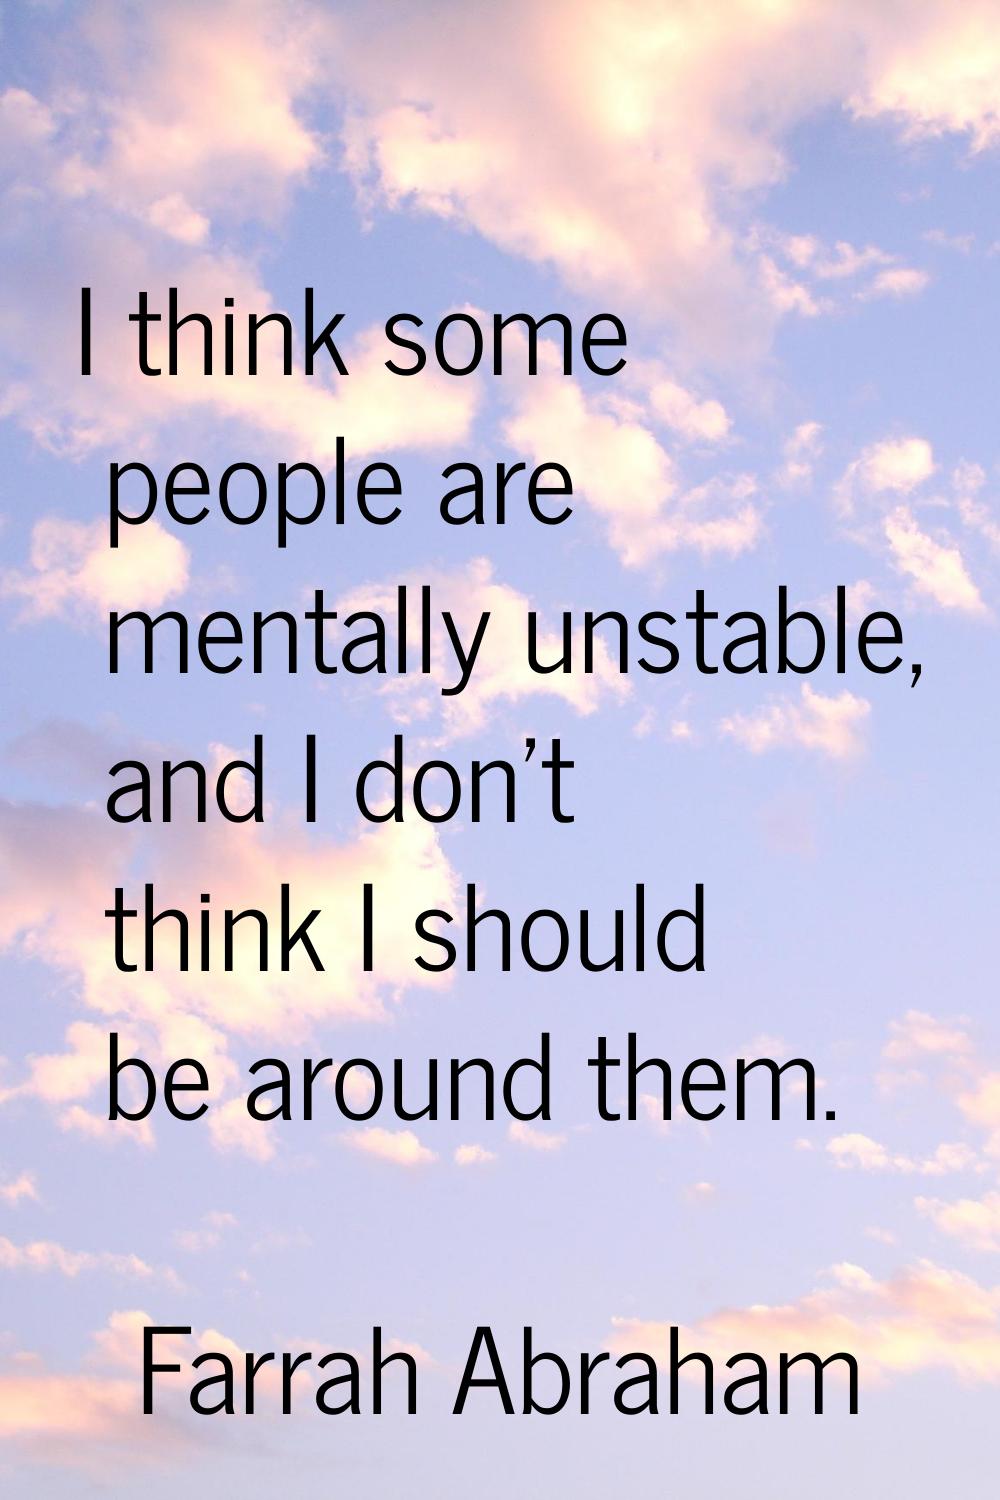 I think some people are mentally unstable, and I don't think I should be around them.